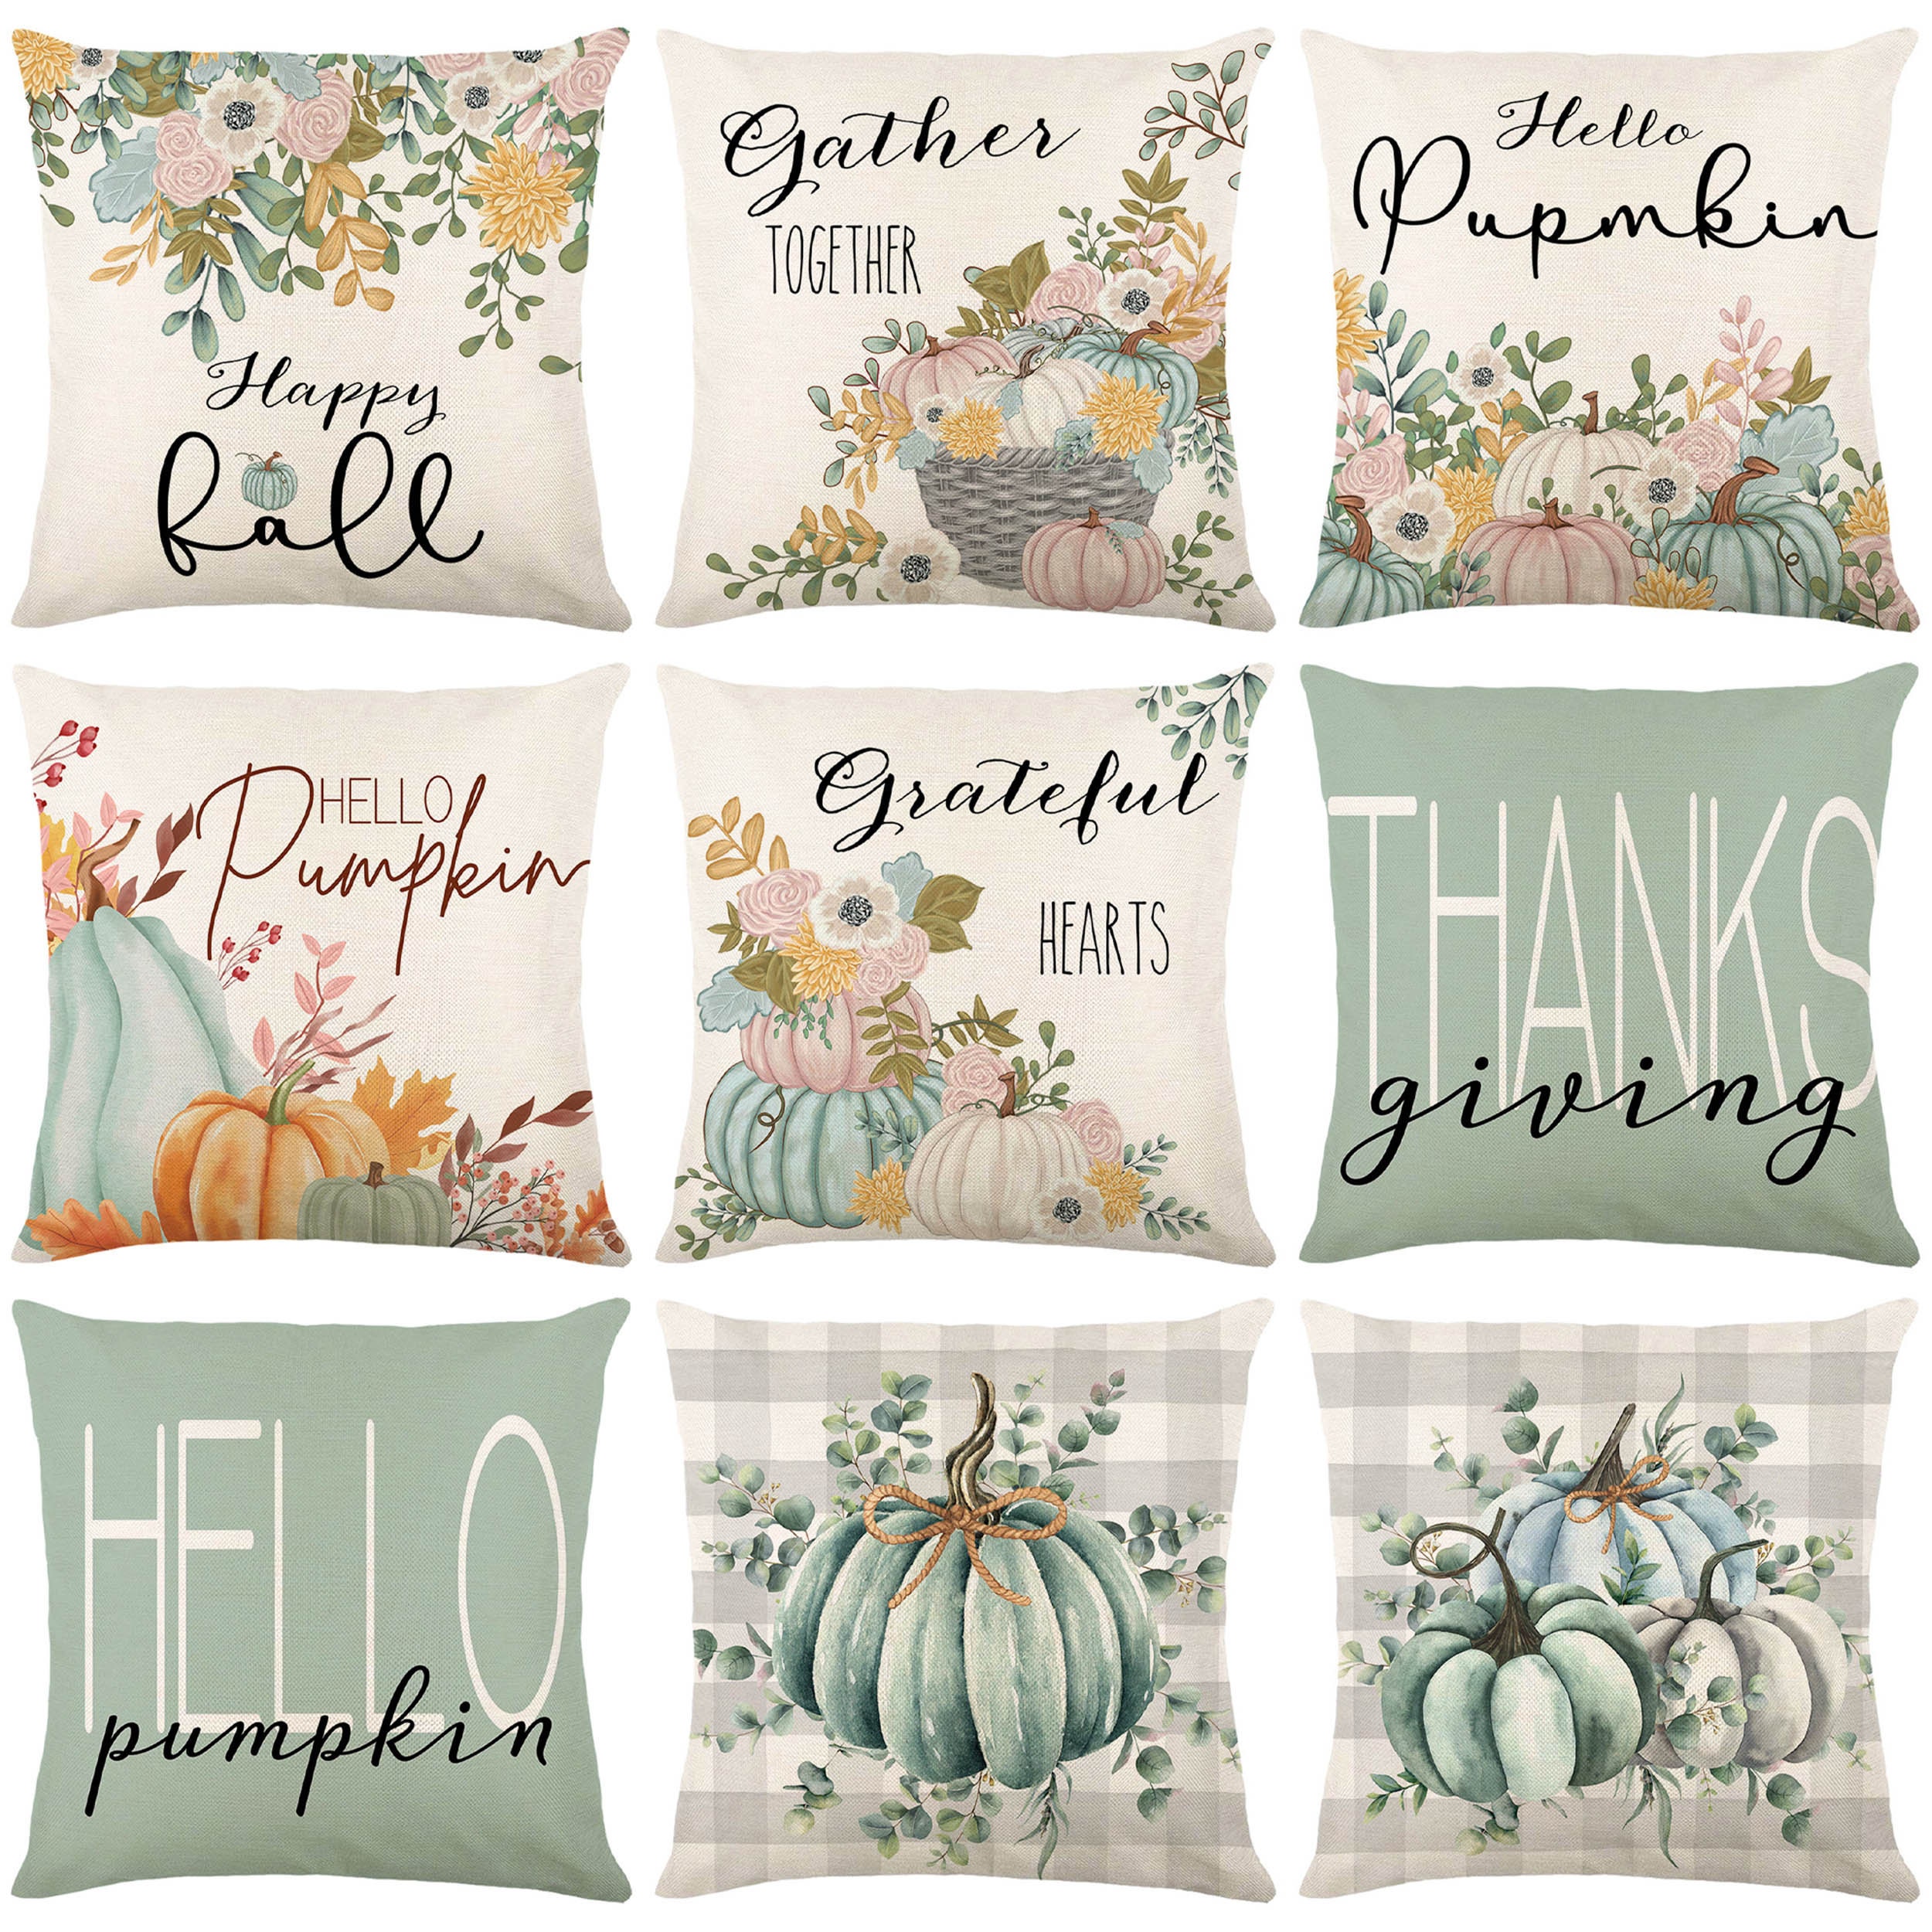 Fall Pillow Set # 2  3 Pillow Covers – ONE AFFIRMATION